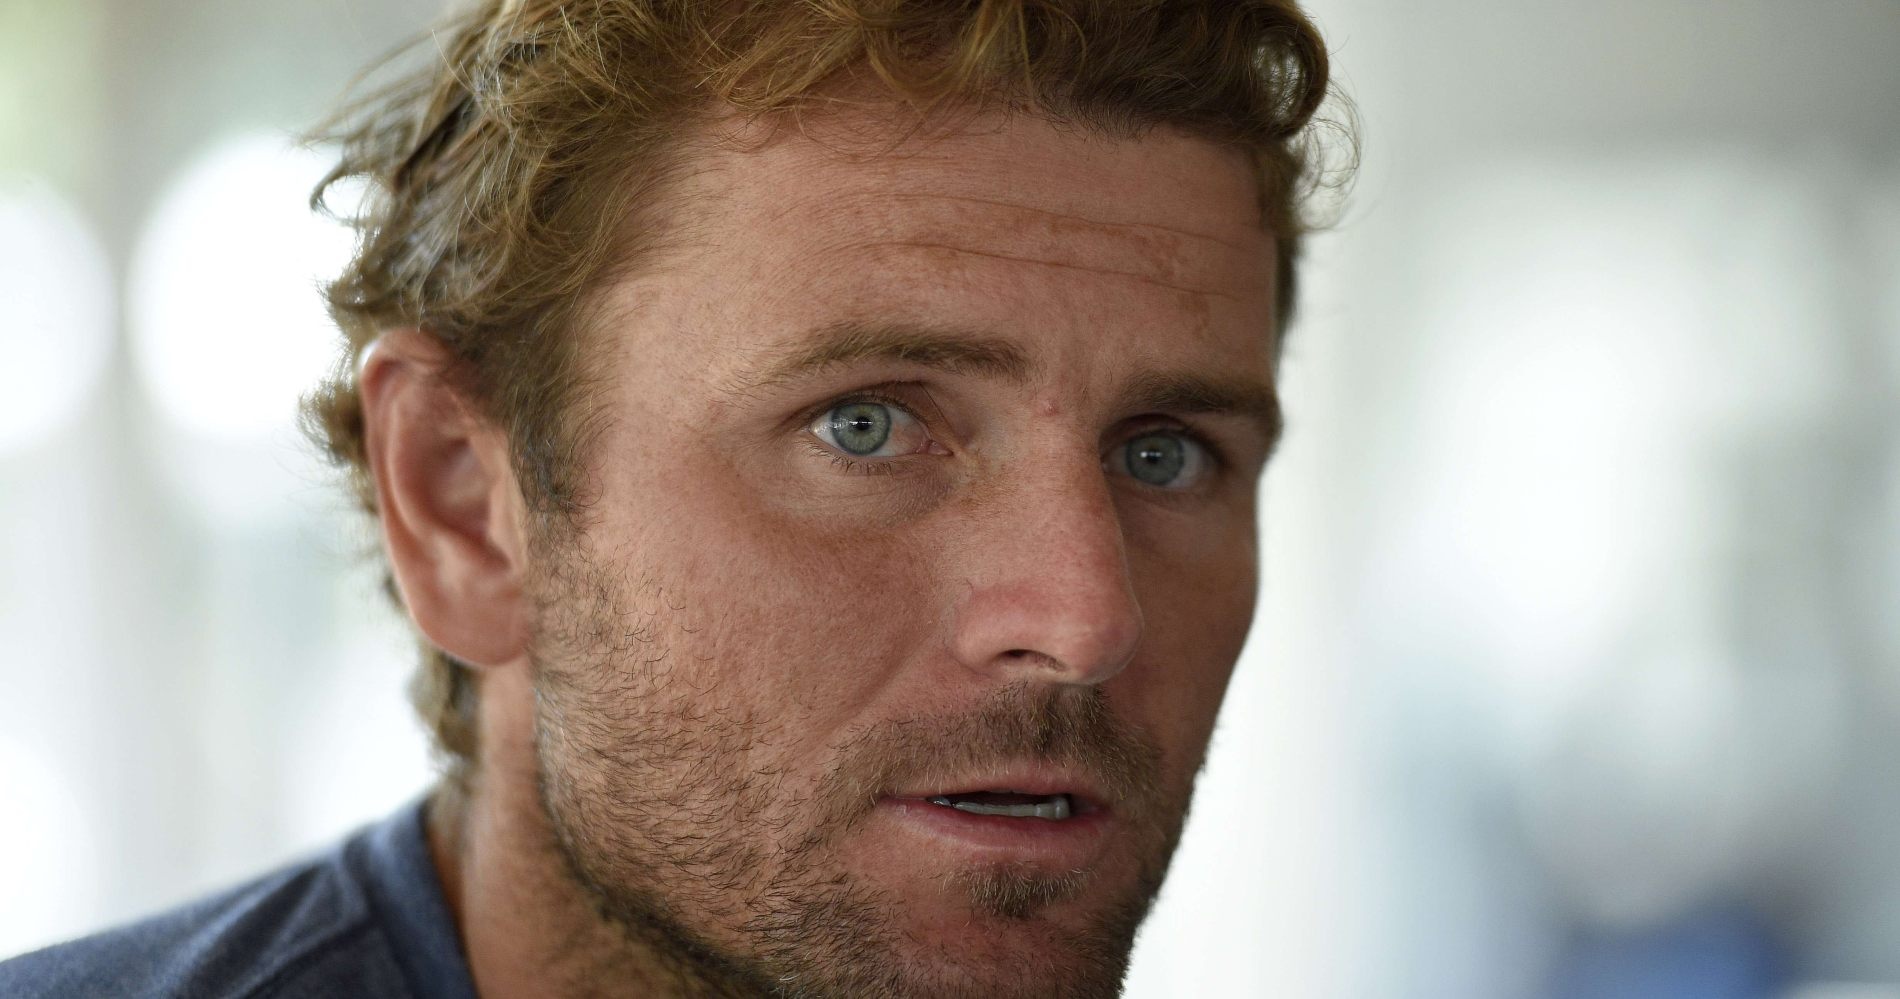 The Breaking Point Looks at the Career of Tennis Pro, Mardy Fish